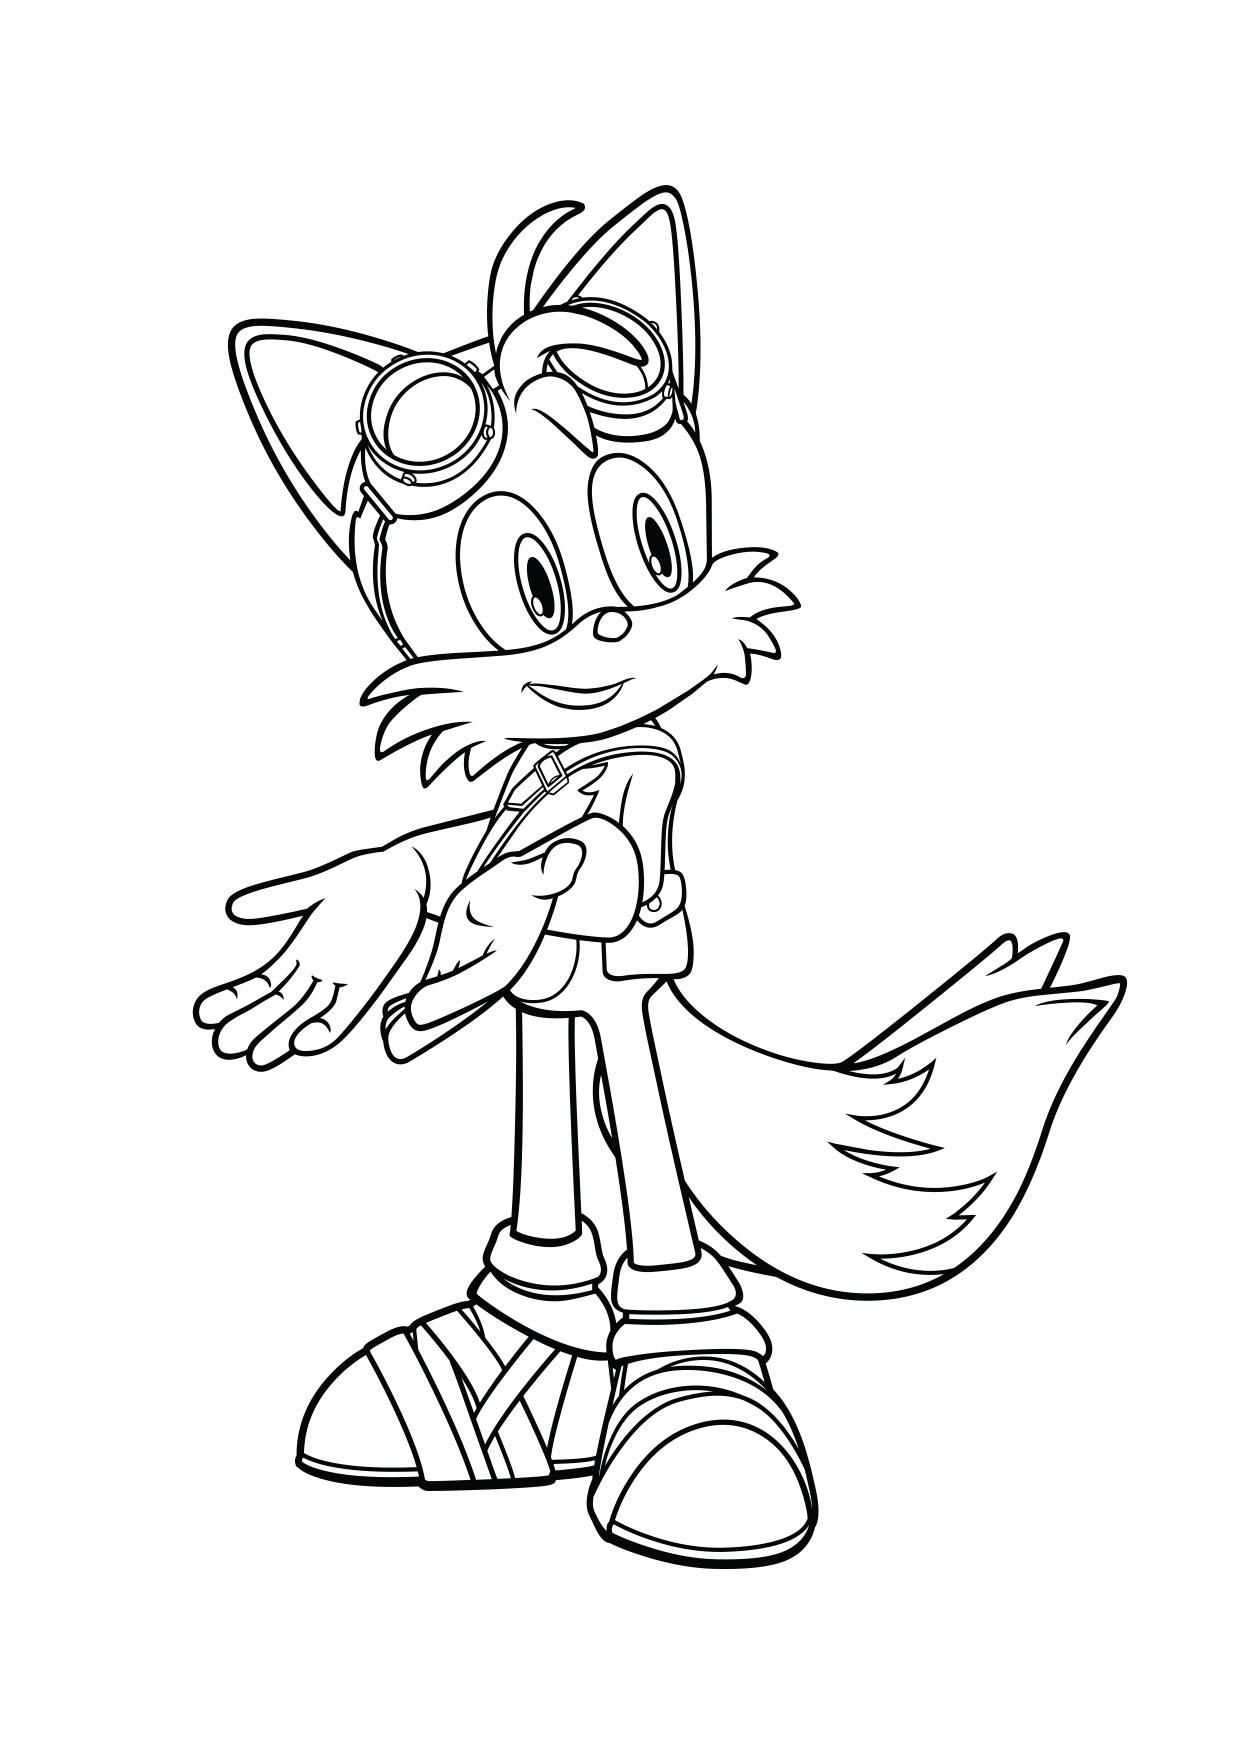 Sonic 2 Coloring Pages